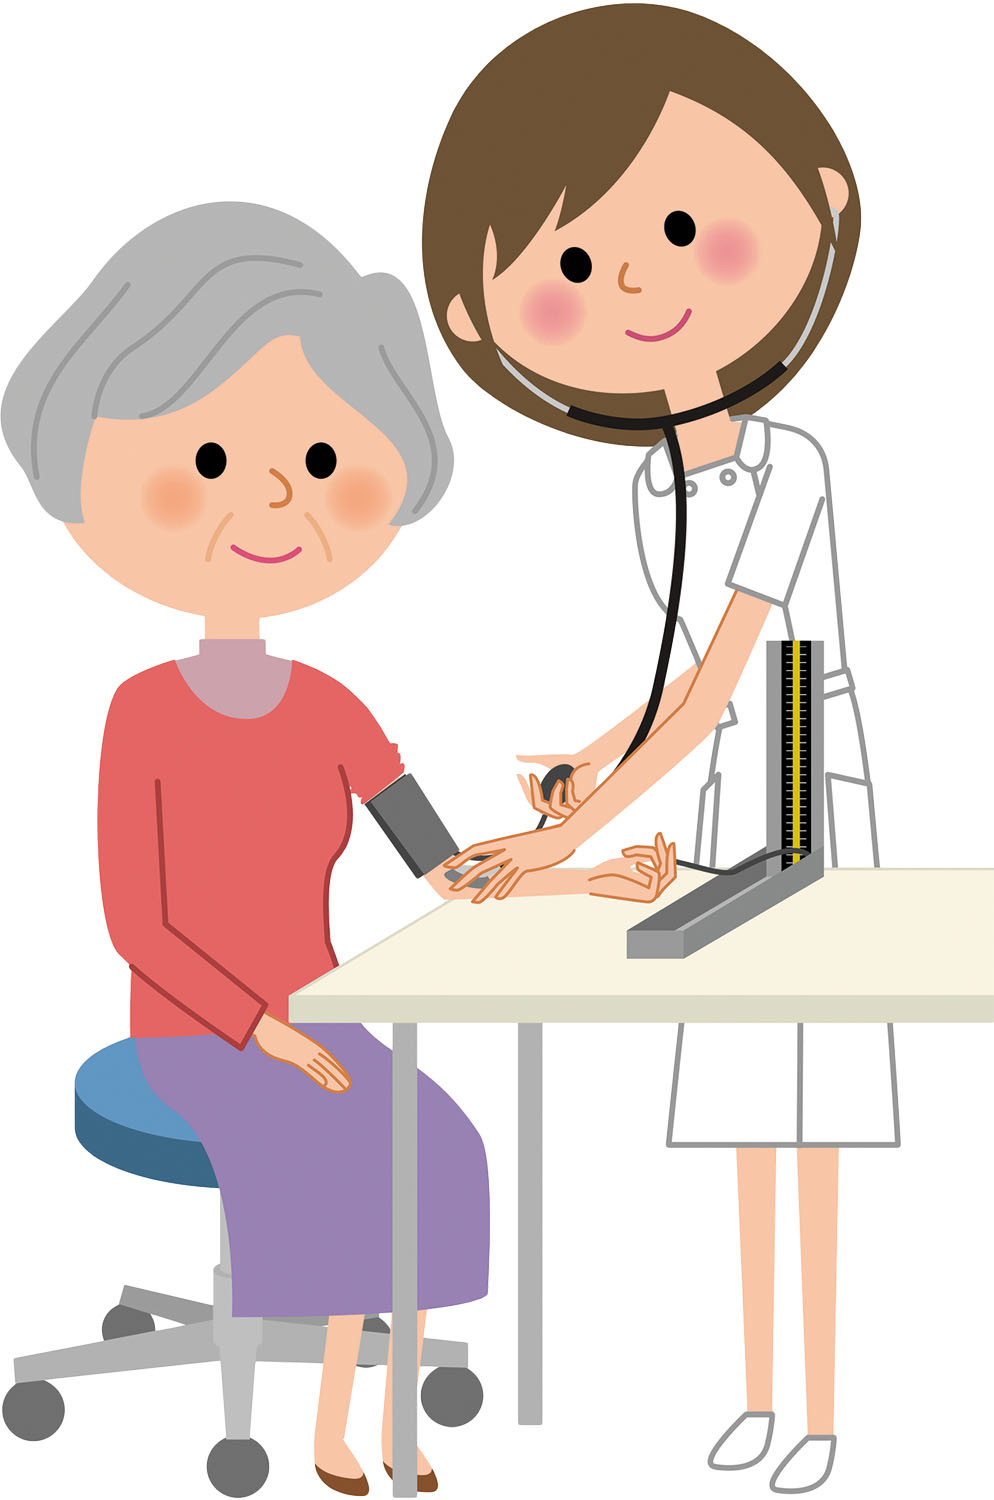 illustration of a woman with gray hair having her blood pressure taken by another woman wearing a white uniform using a stethoscope and a blood pressure cuff